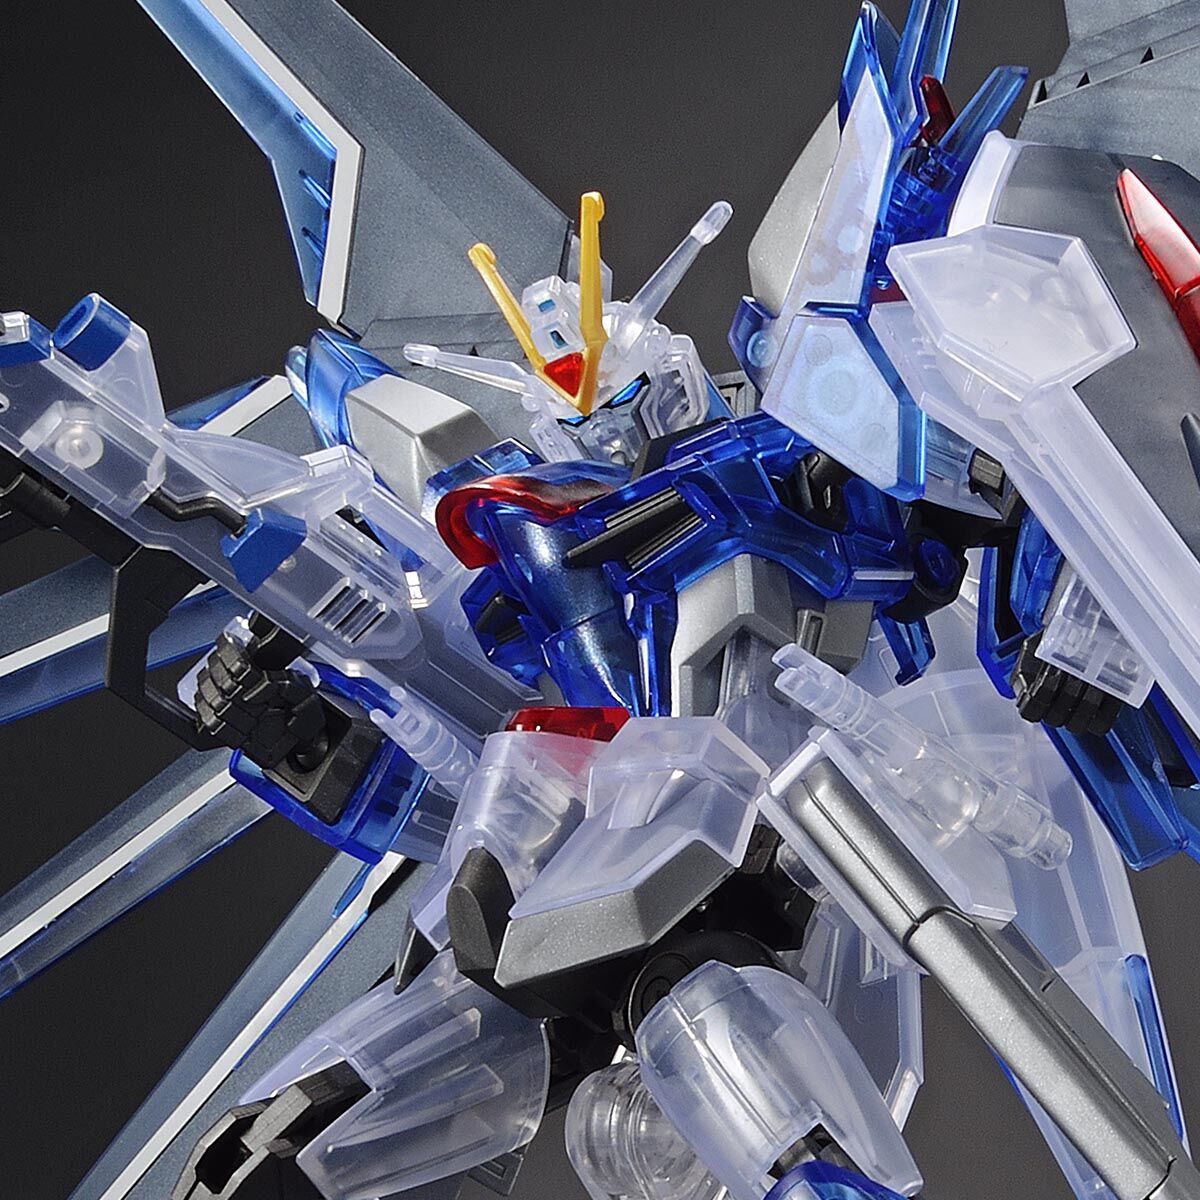 HGCE 1/144 STTS-909 Rising Freedom Gundam(Movie Release Commemoration Package + Clear Color)